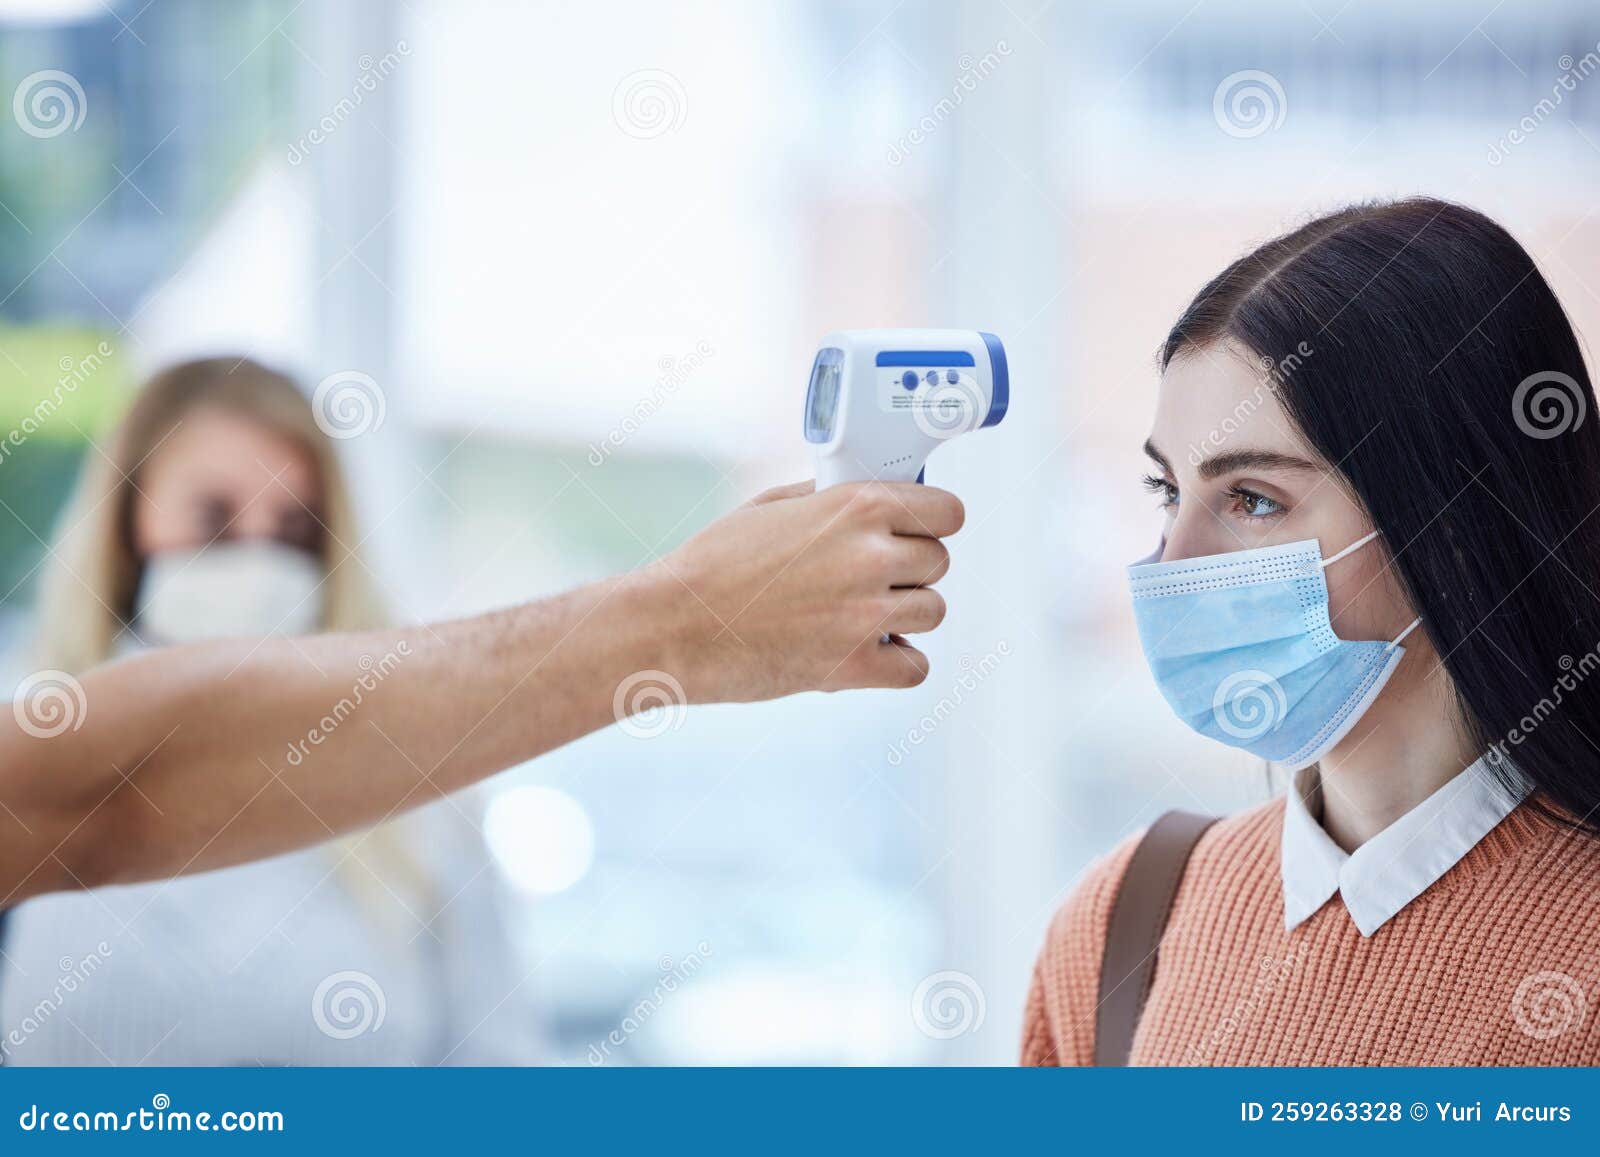 https://thumbs.dreamstime.com/z/travel-thermometer-covid-scanning-airport-woman-security-compliance-safety-check-health-corona-worker-checking-lady-259263328.jpg